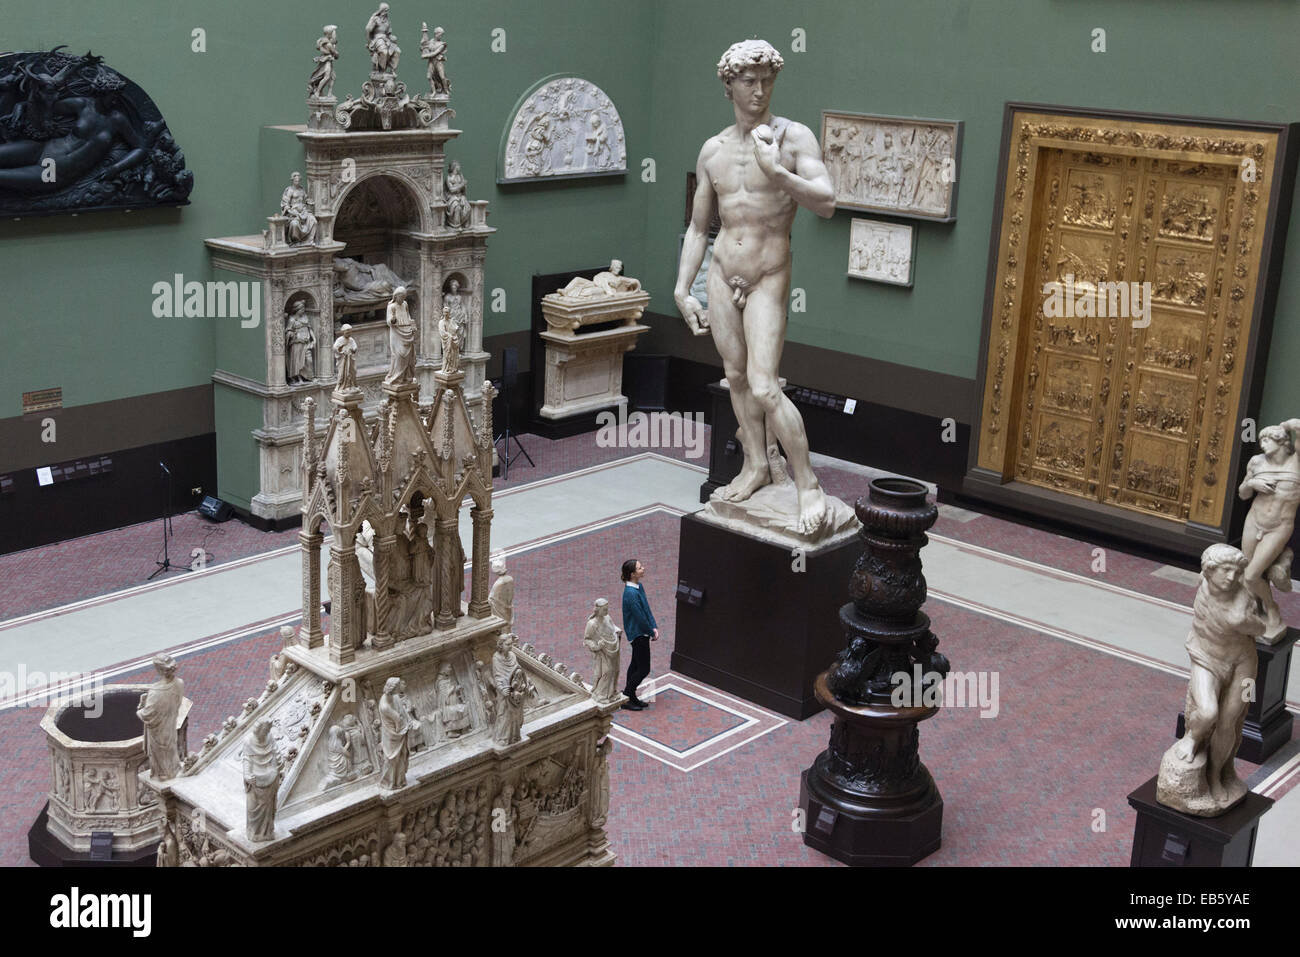 In Focus: The breathtaking sculpture at the V&A with unexplained